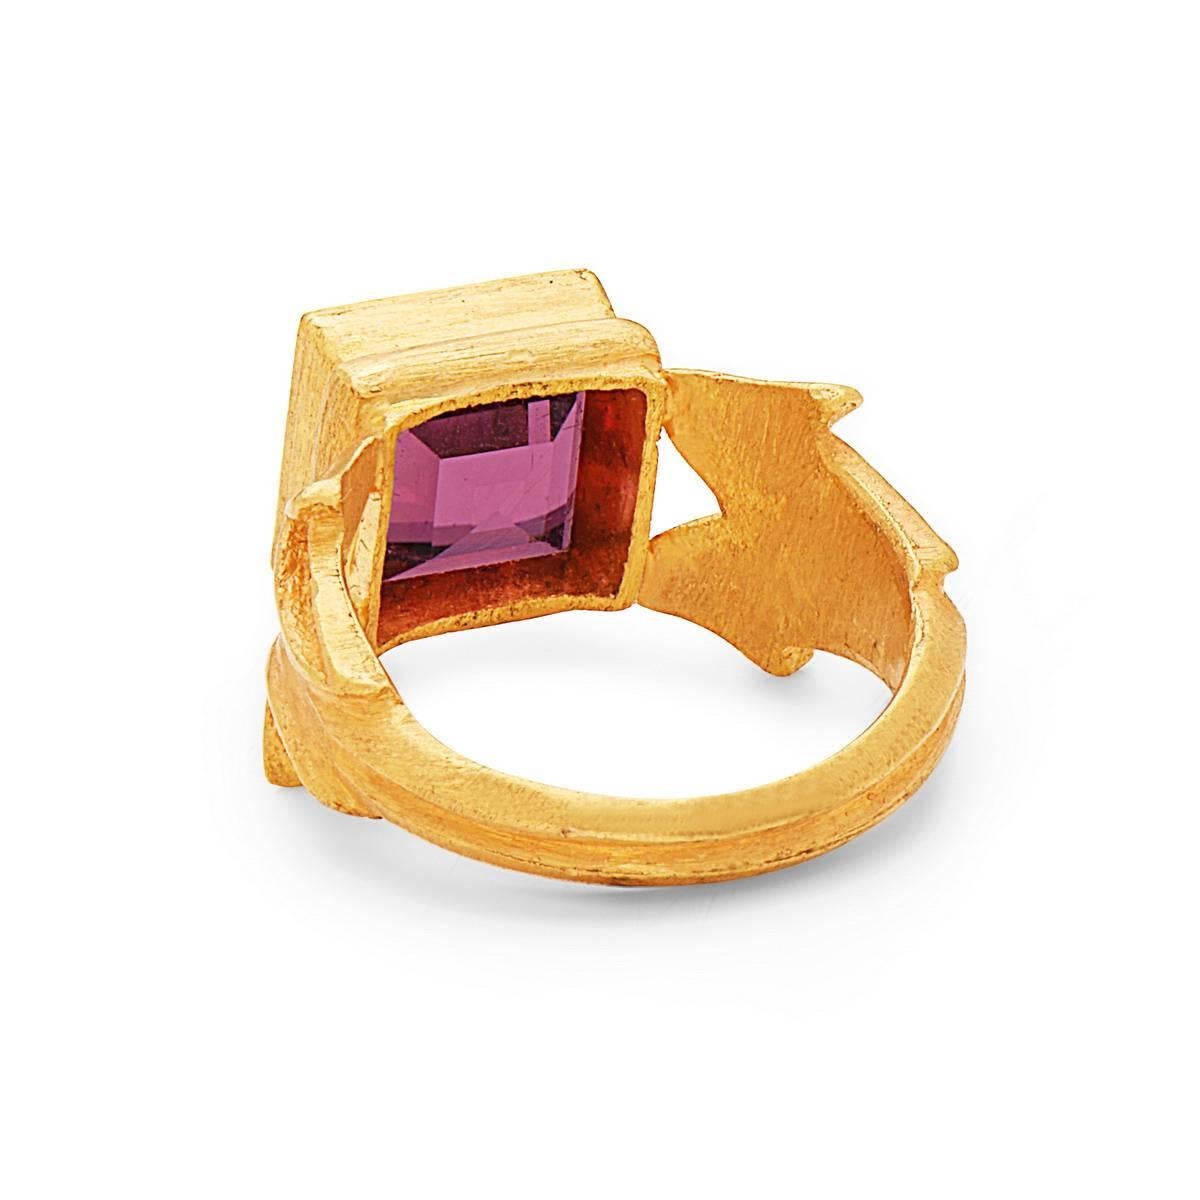 Art Nouveau Pink Tourmaline Ring in Gold